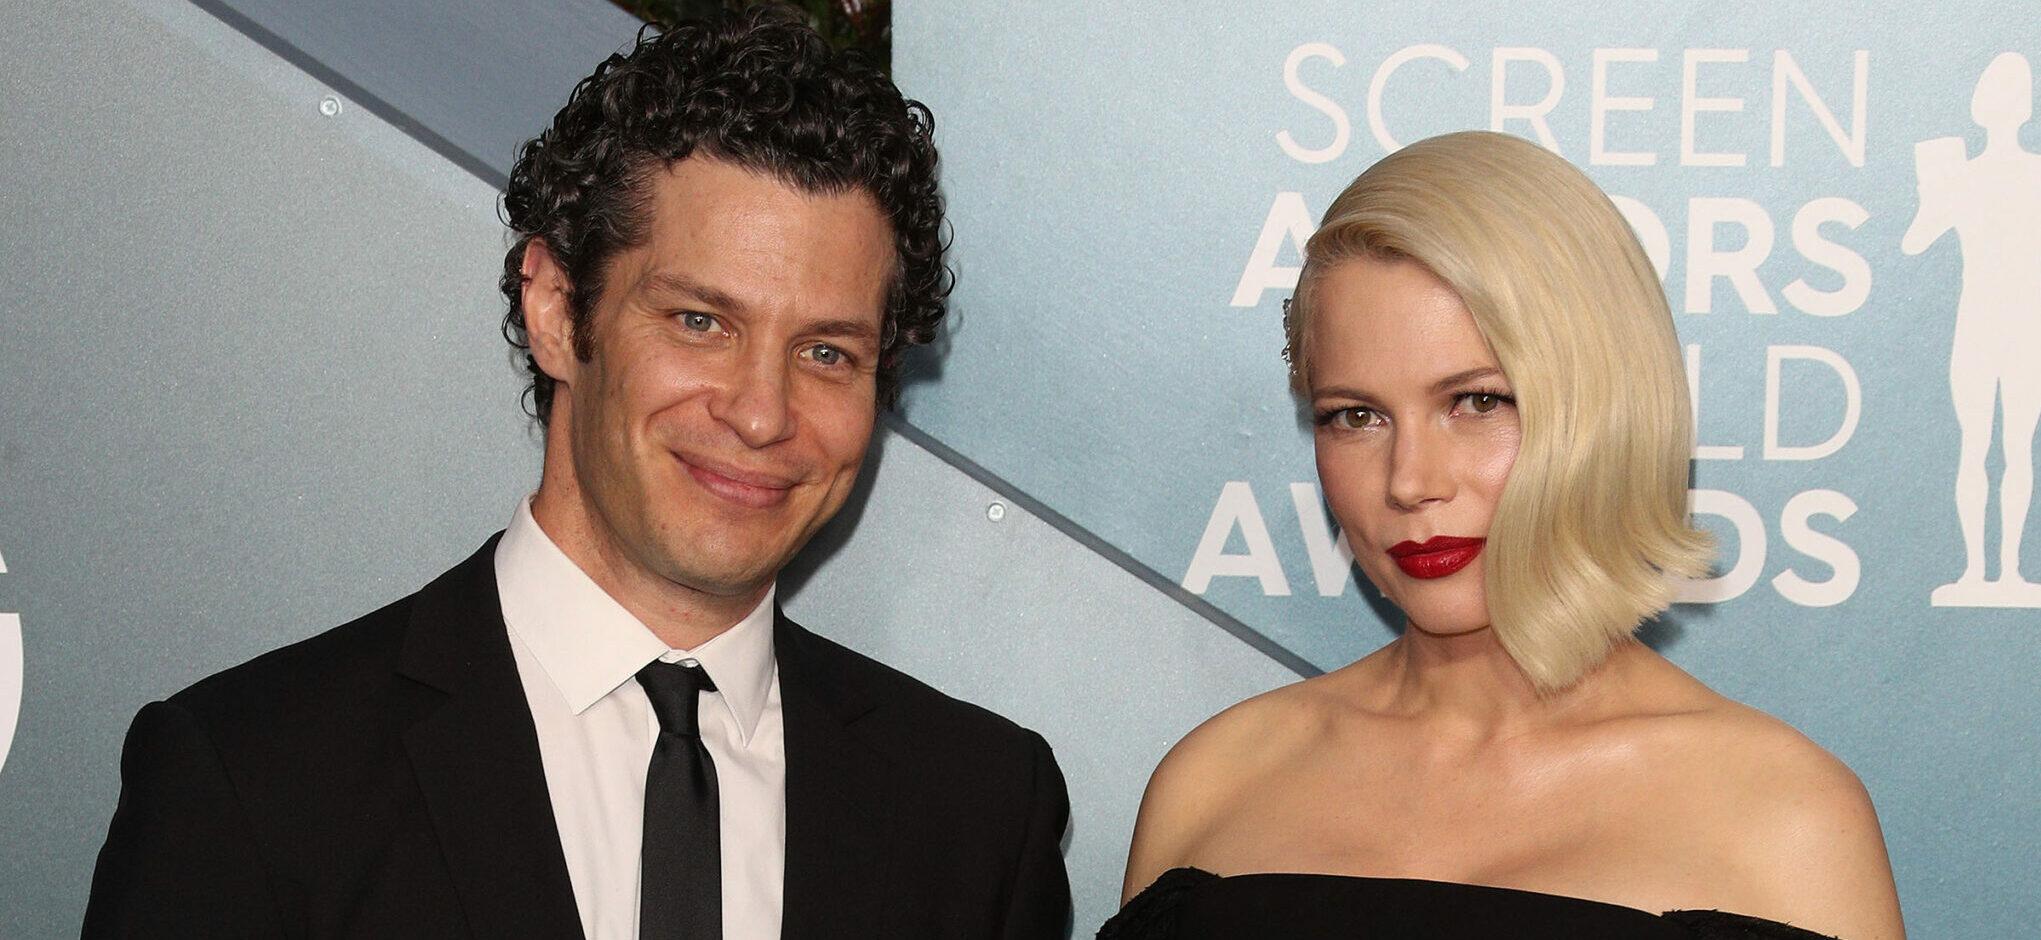 26th Annual SAG Awards - Arrivals. 19 Jan 2020 Pictured: Michelle Williams, Thomas Kail.